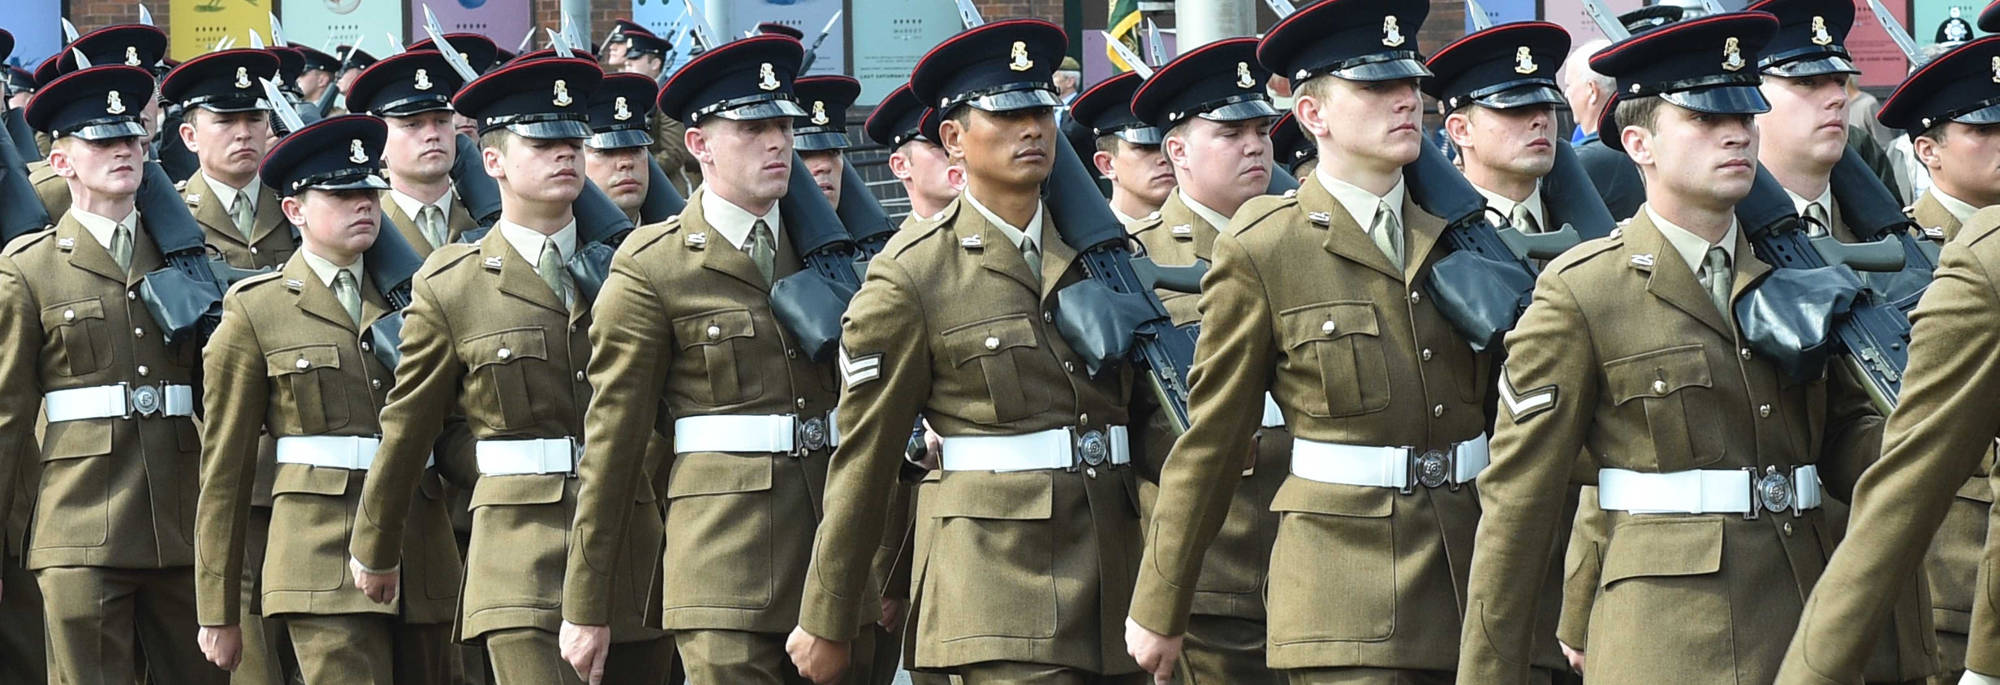 Members of the Yorkshire Regiment on parade in Middlesbrough